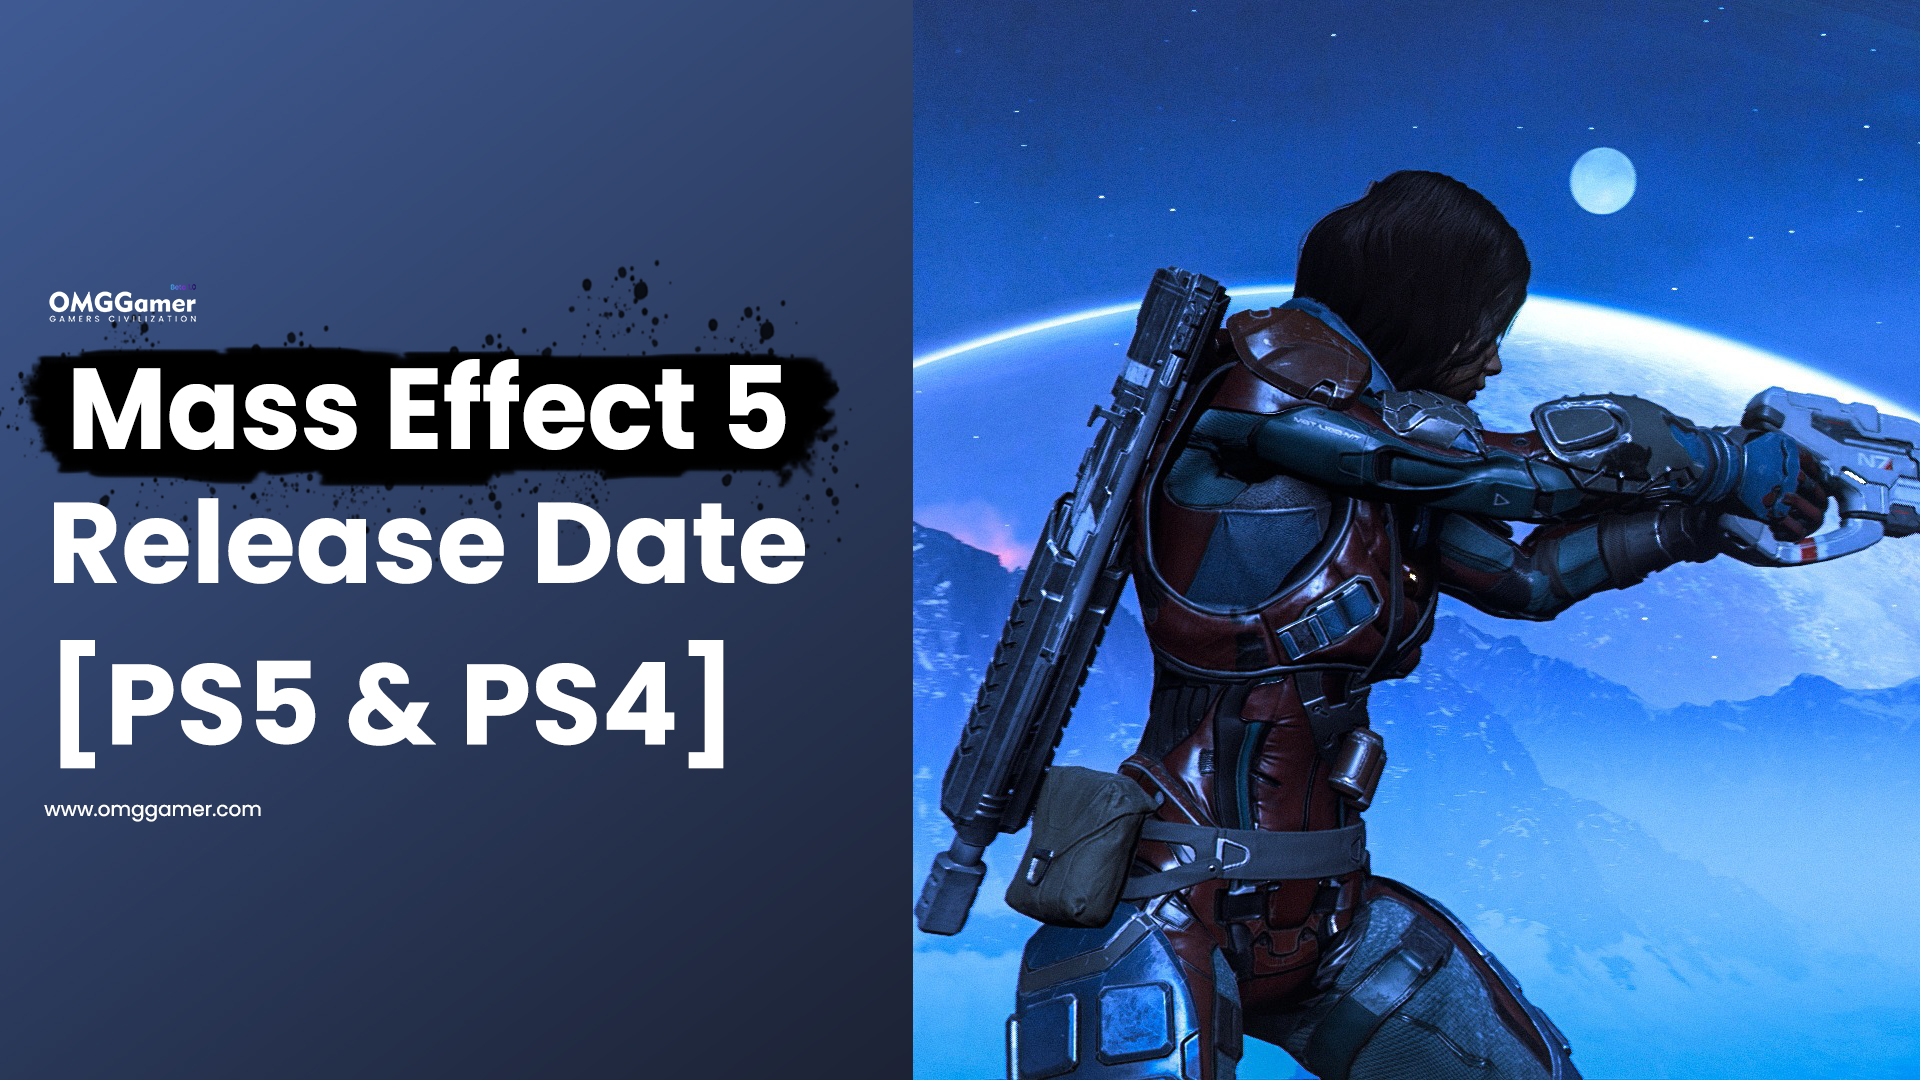 Mass Effect 5 Release Date [PS5 & PS4]